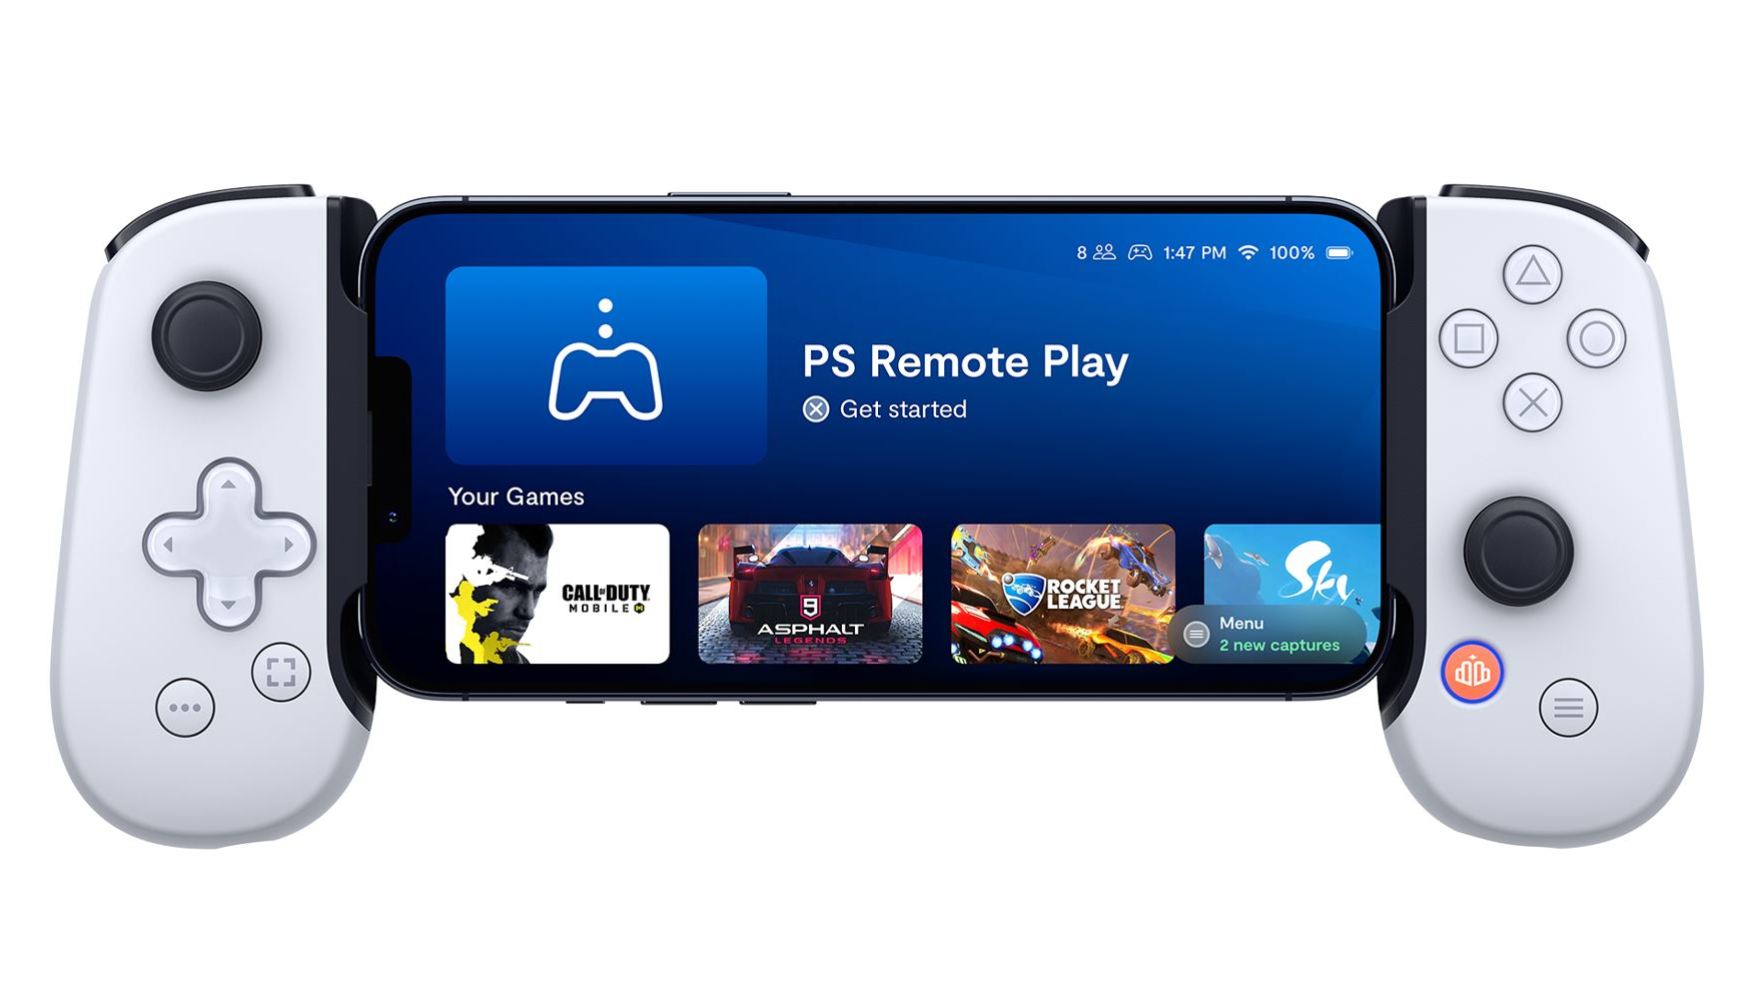 Sony PlayStation Portal is a $200 remote play device coming later